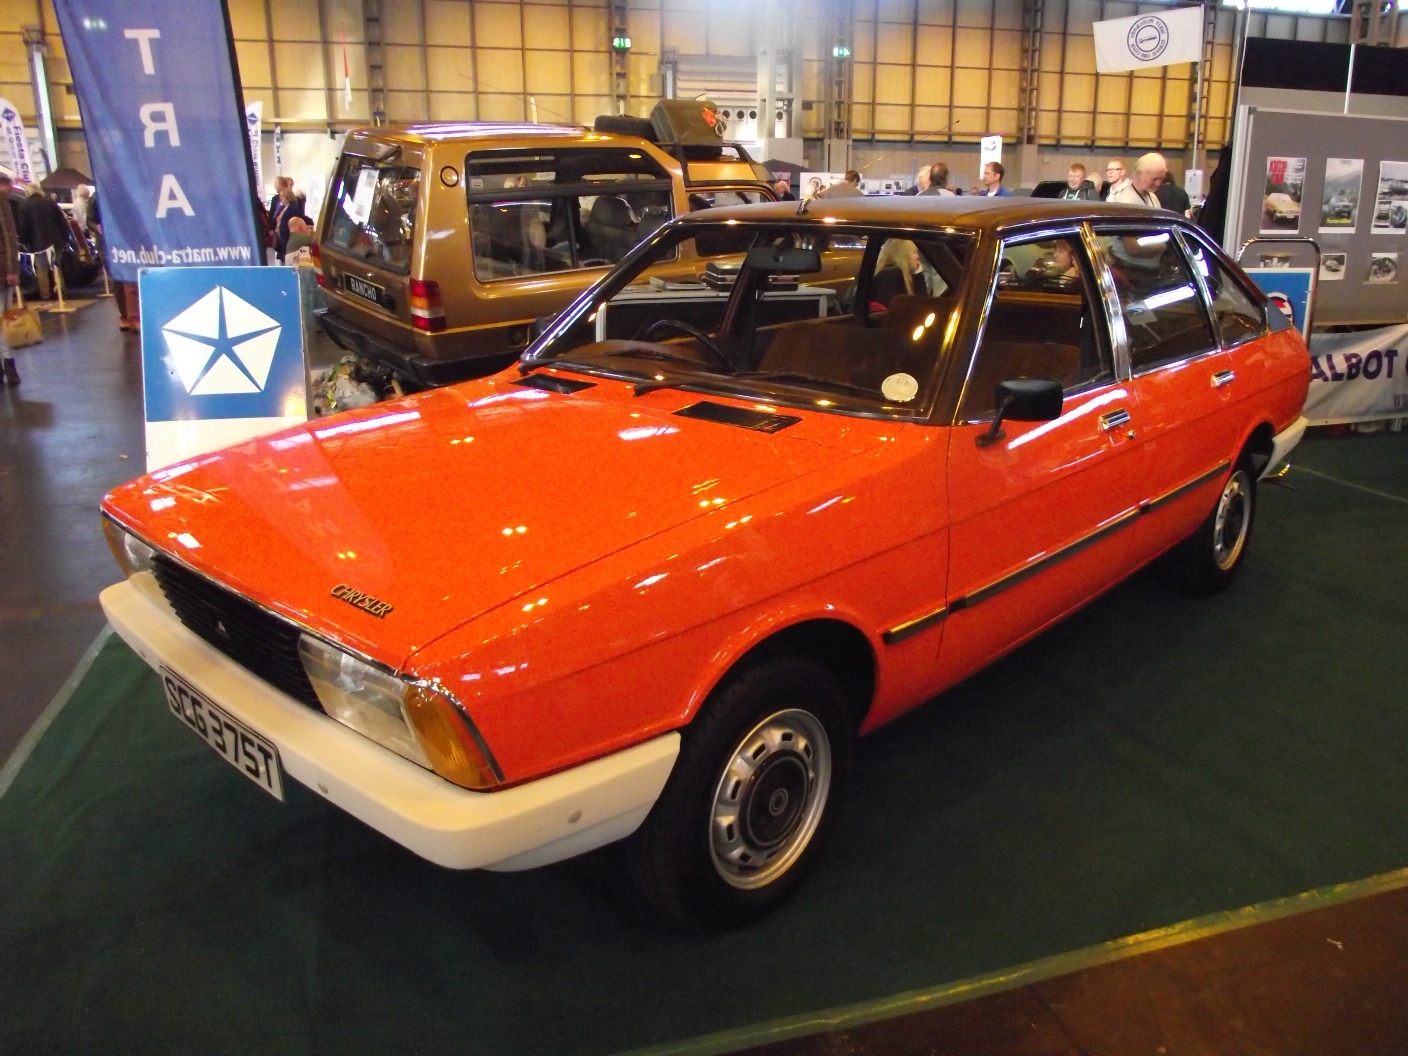 1983 Citroen BX 16TRS - For the love of cars! - Page 2 - Readers' Cars - PistonHeads